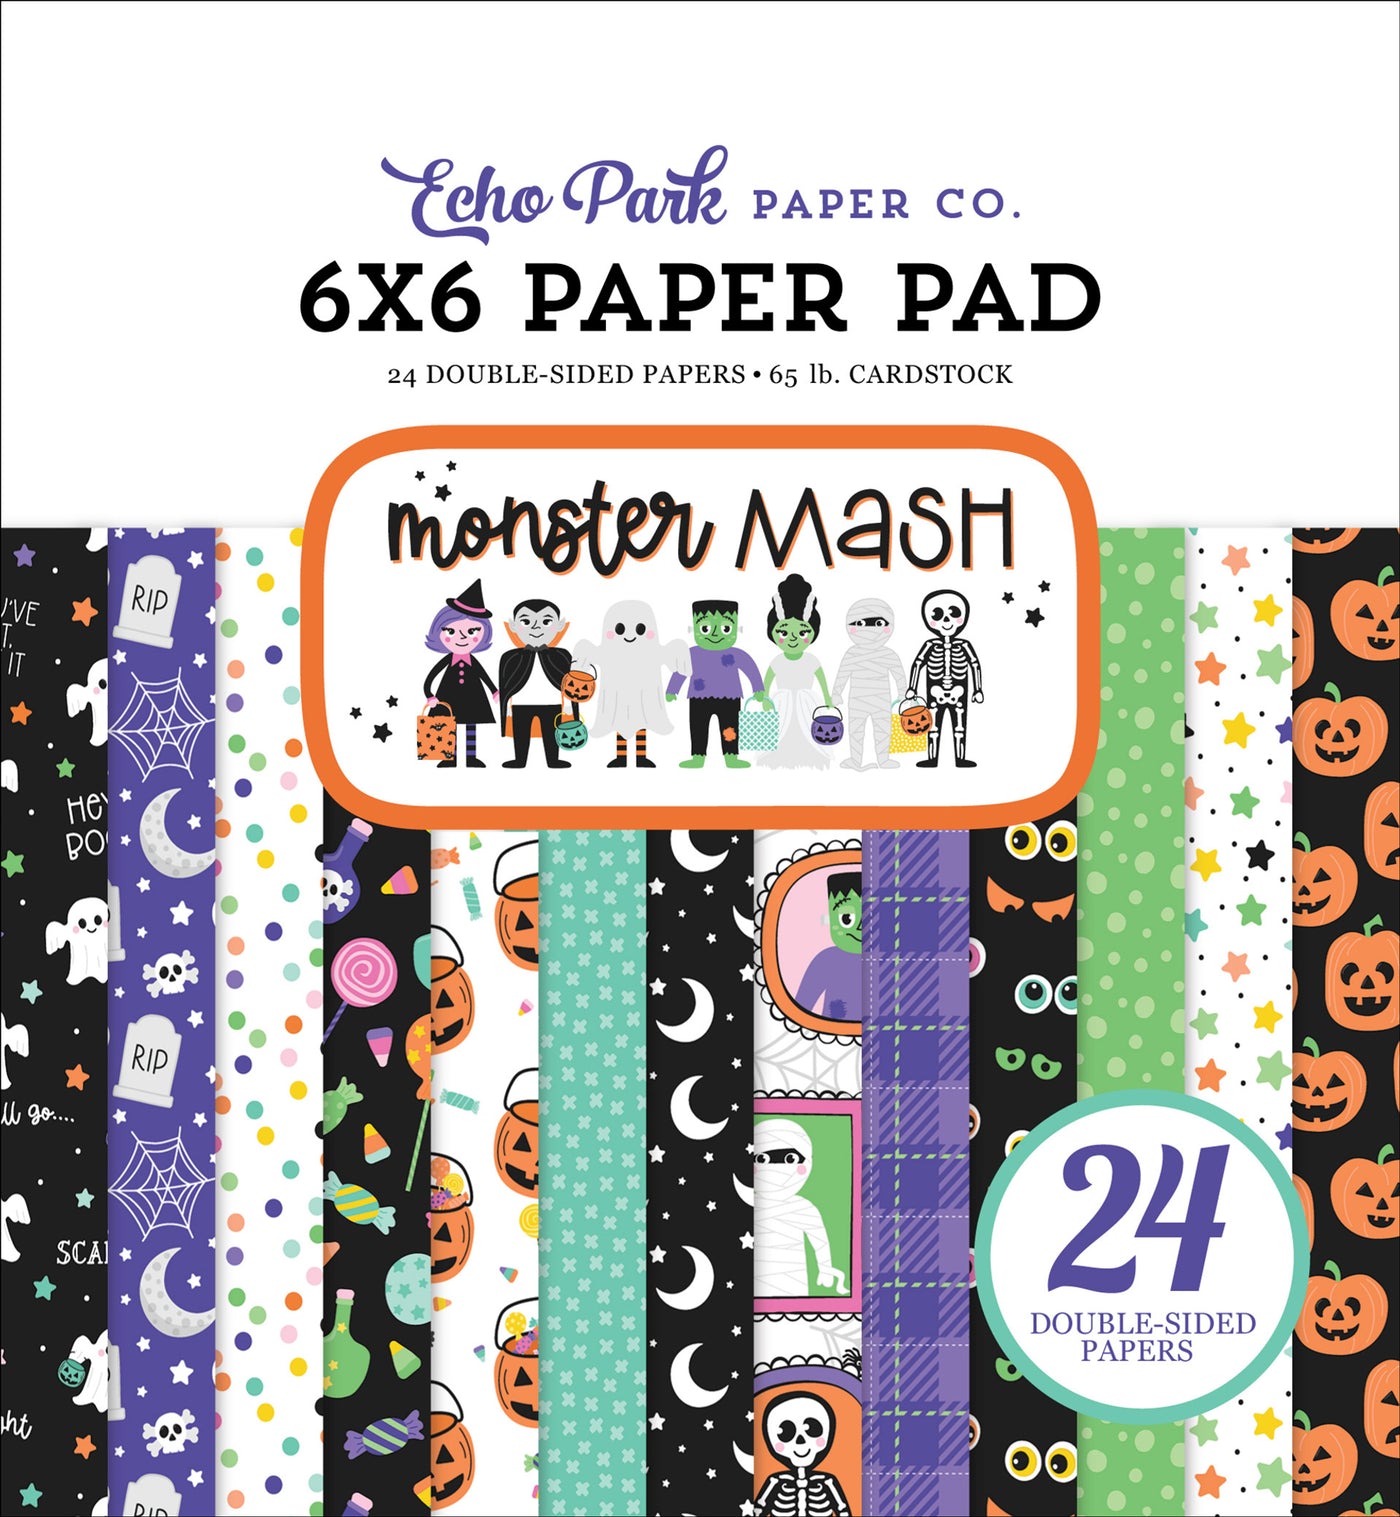 6x6 pad with 24 double-sided pages for fun Halloween paper crafting. Smaller images are great for card making and similar crafts—archival quality.